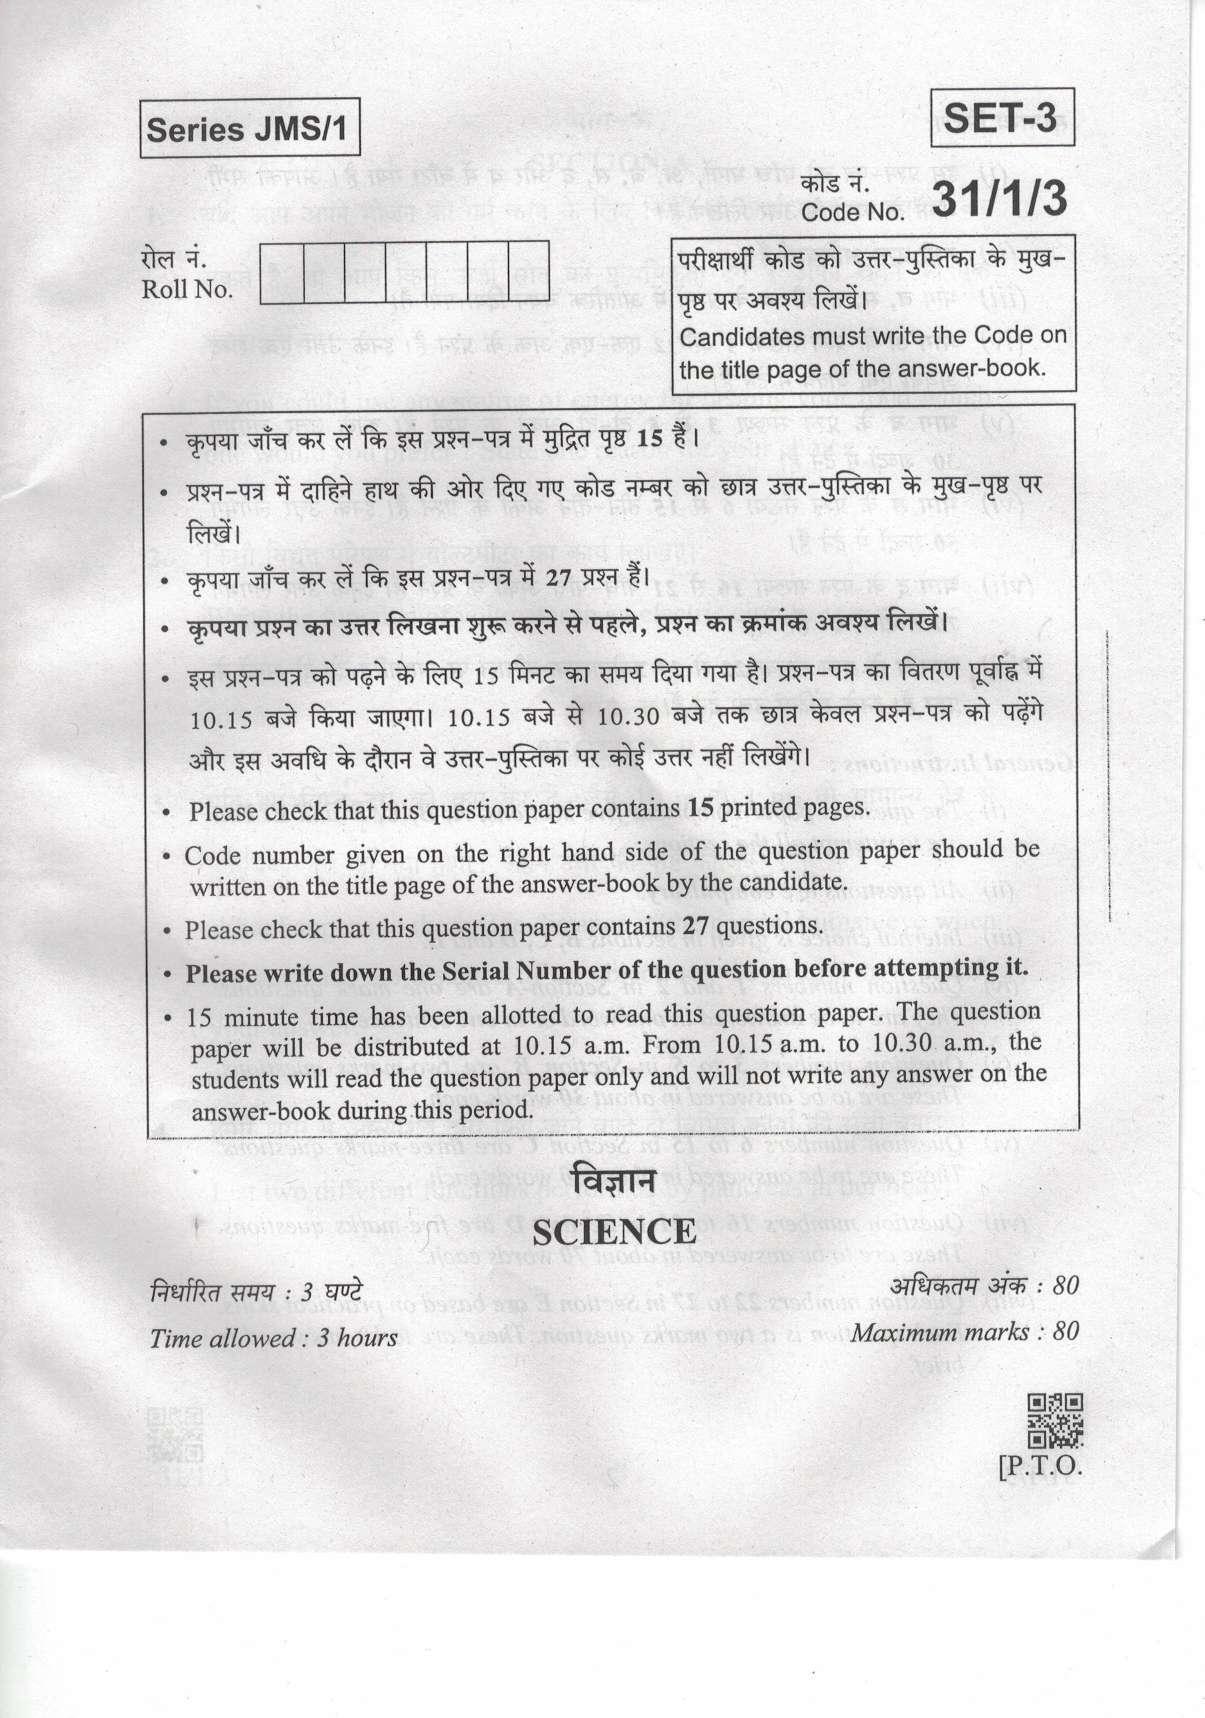 CBSE Class 10 31-1-3 Science 2019 Question Paper - Page 1